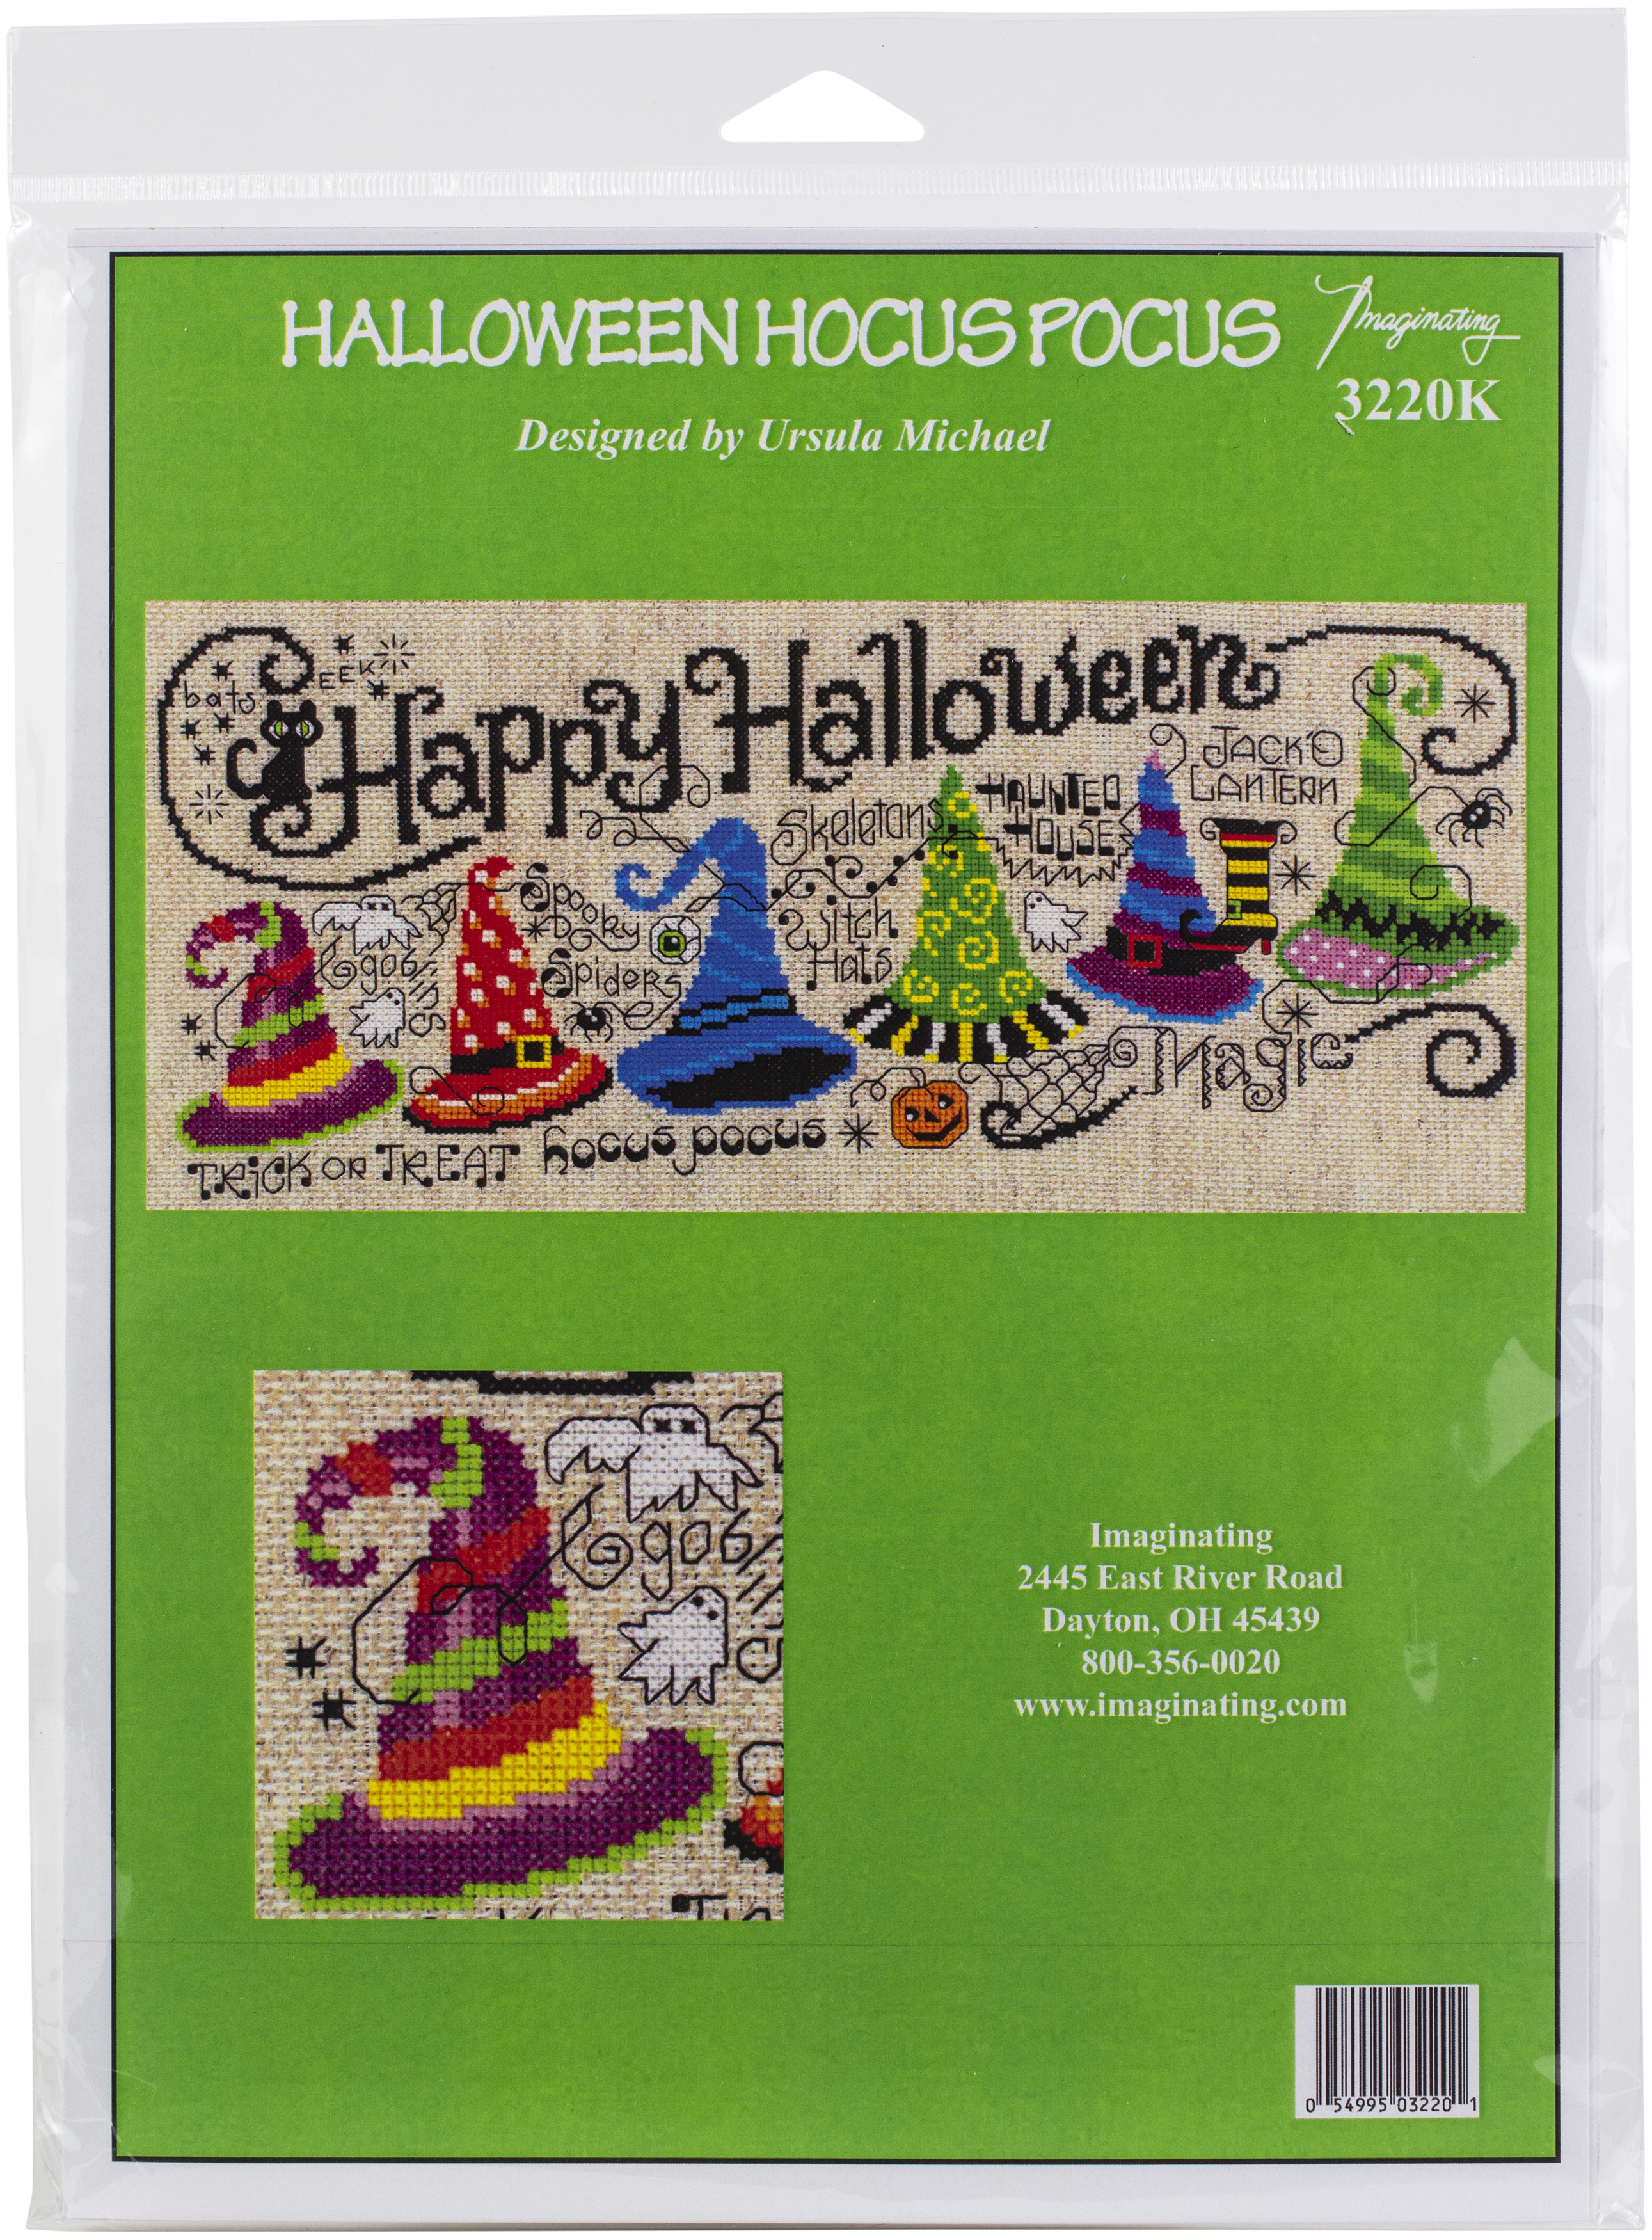 Halloween Hocus Pocus Counted Cross Stitch Kit by Imaginating Cross Stitch